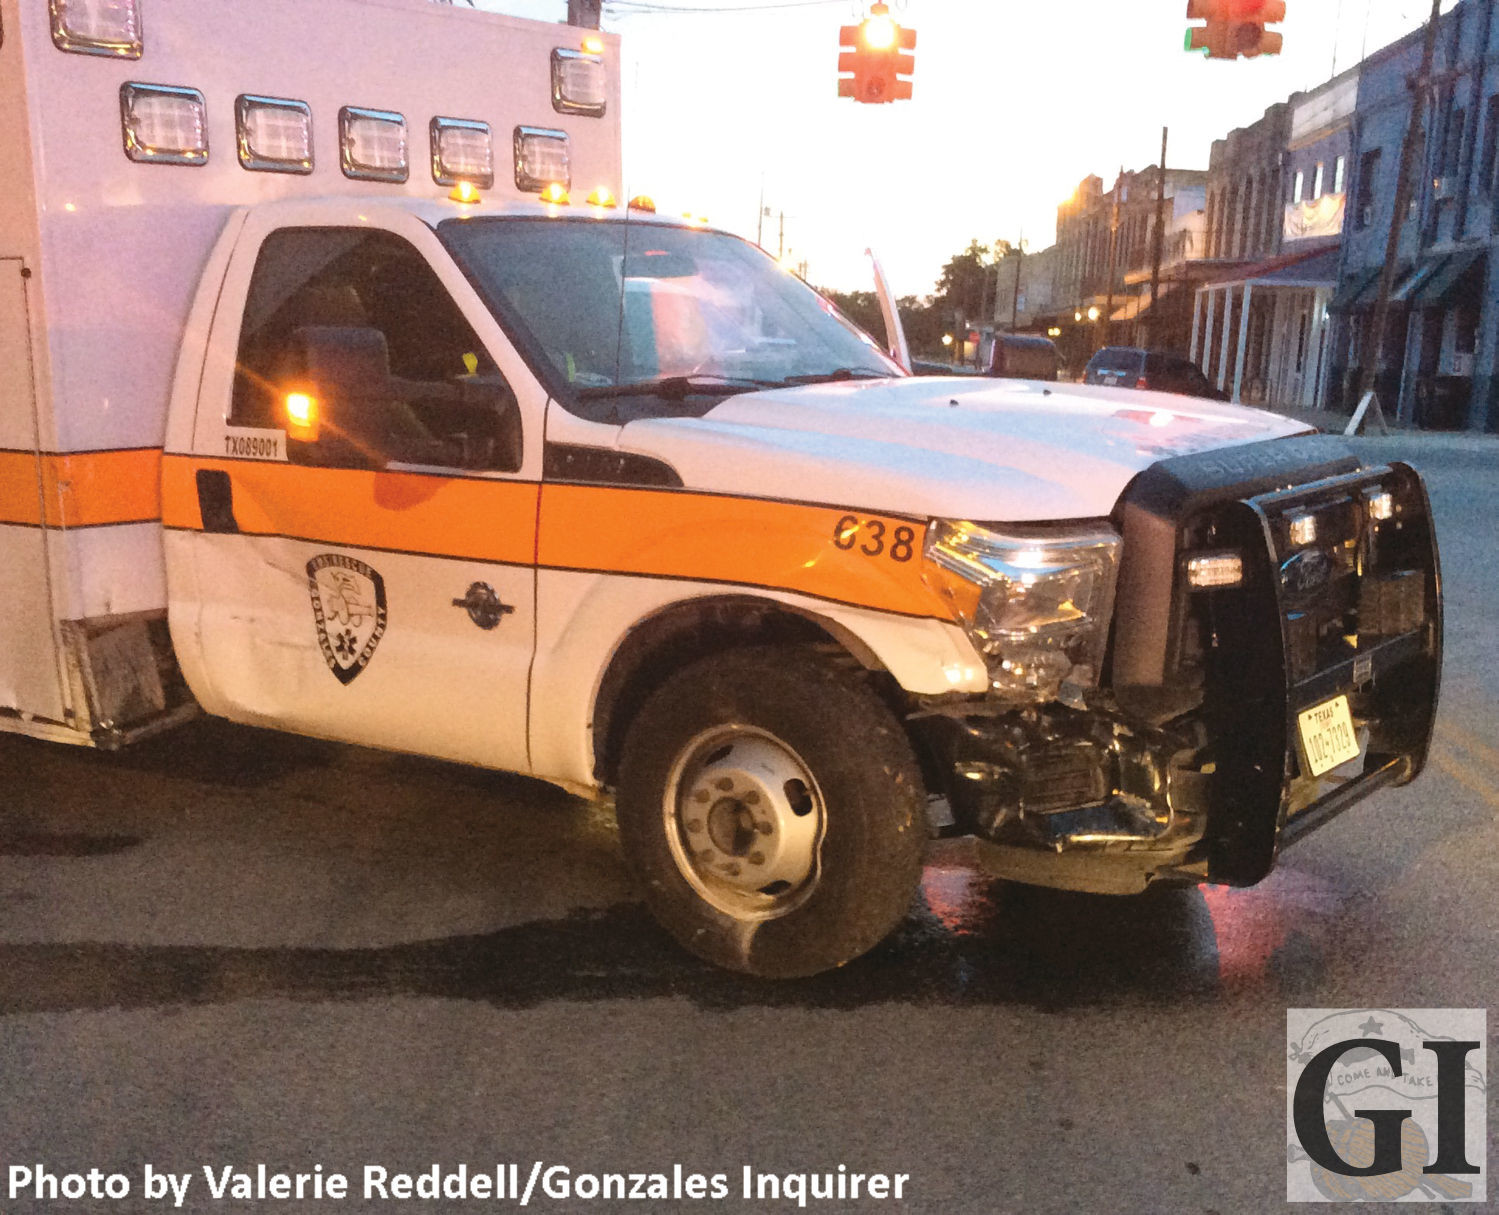 Tuesday evening, a 2013 Ford EMS ambulance collided with a white Chevrolet car, though no serious injuries were reported.